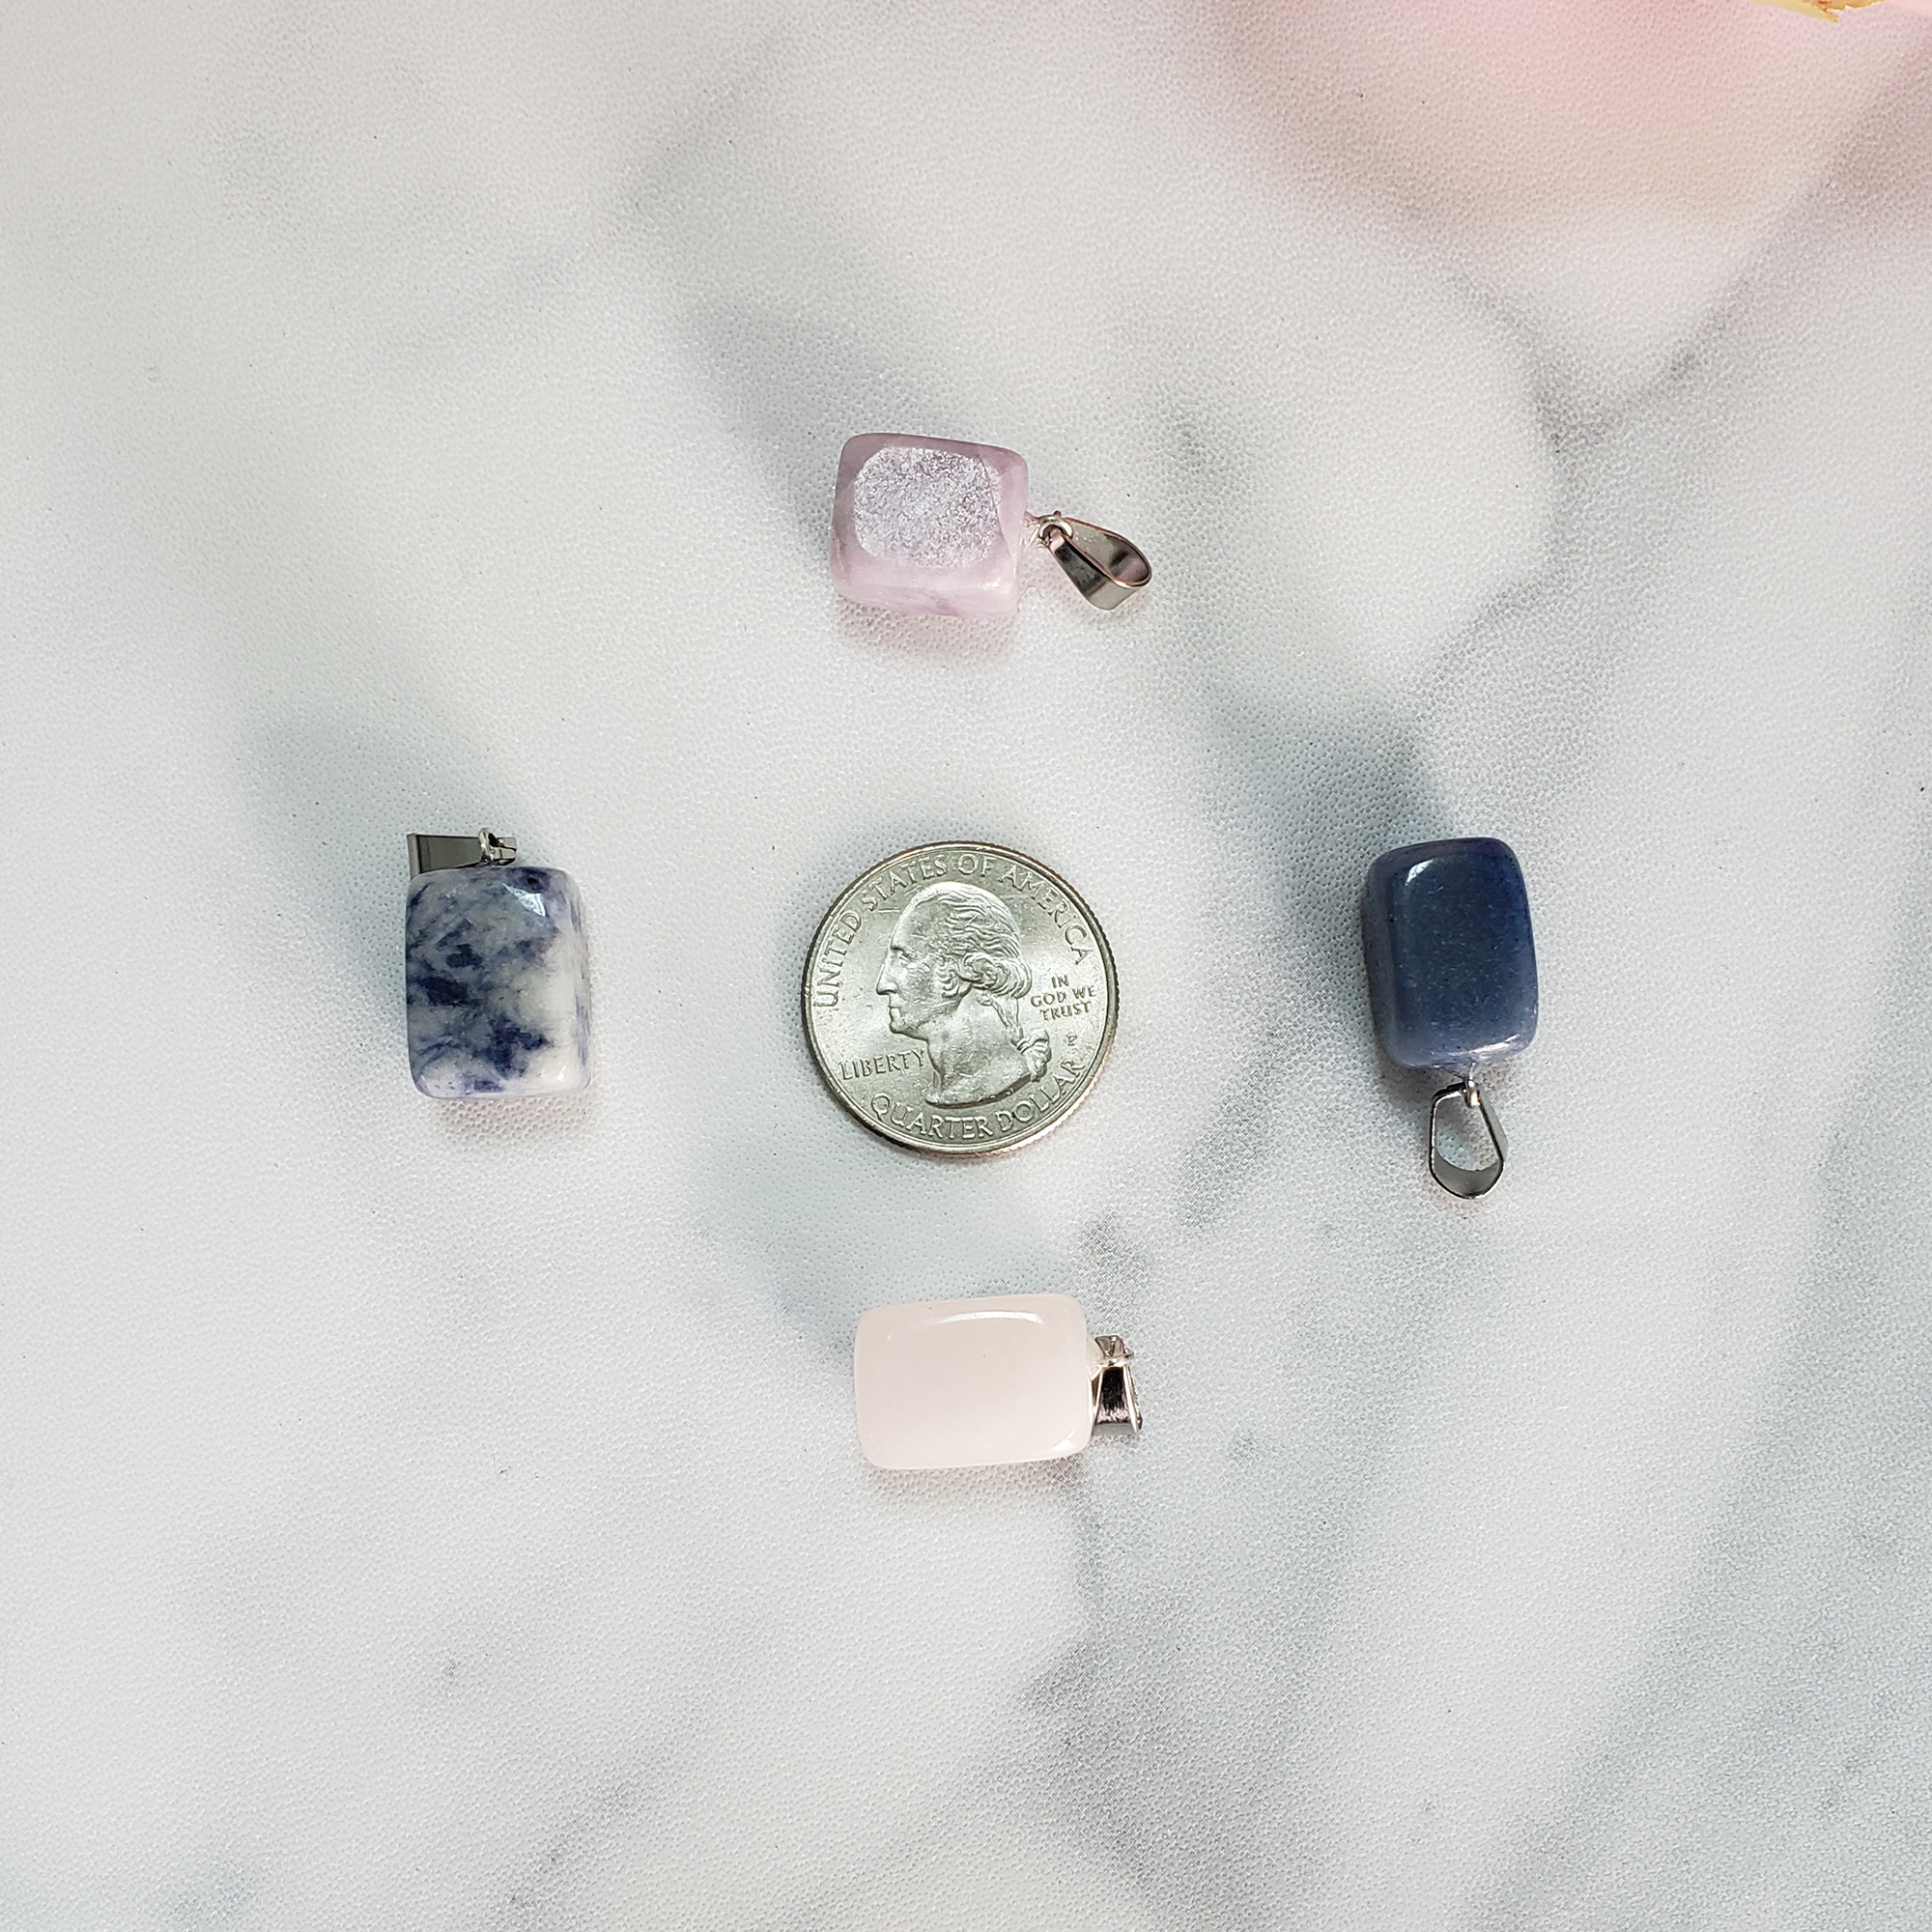 Intuitively Selected Crystal Nugget Gemstone Pendant - Size Comparison